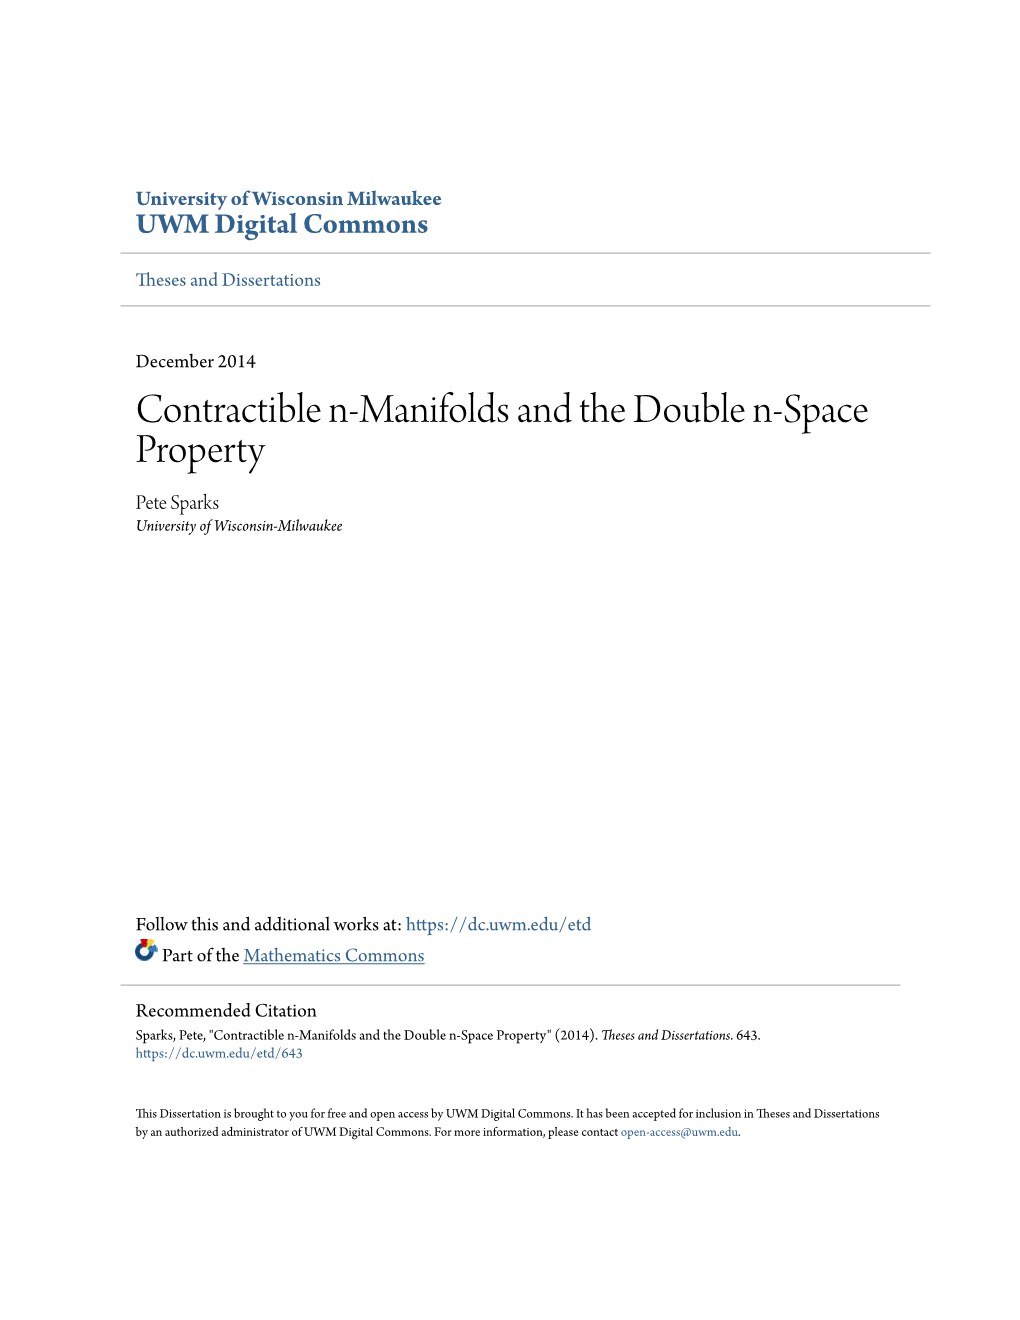 Contractible N-Manifolds and the Double N-Space Property Pete Sparks University of Wisconsin-Milwaukee